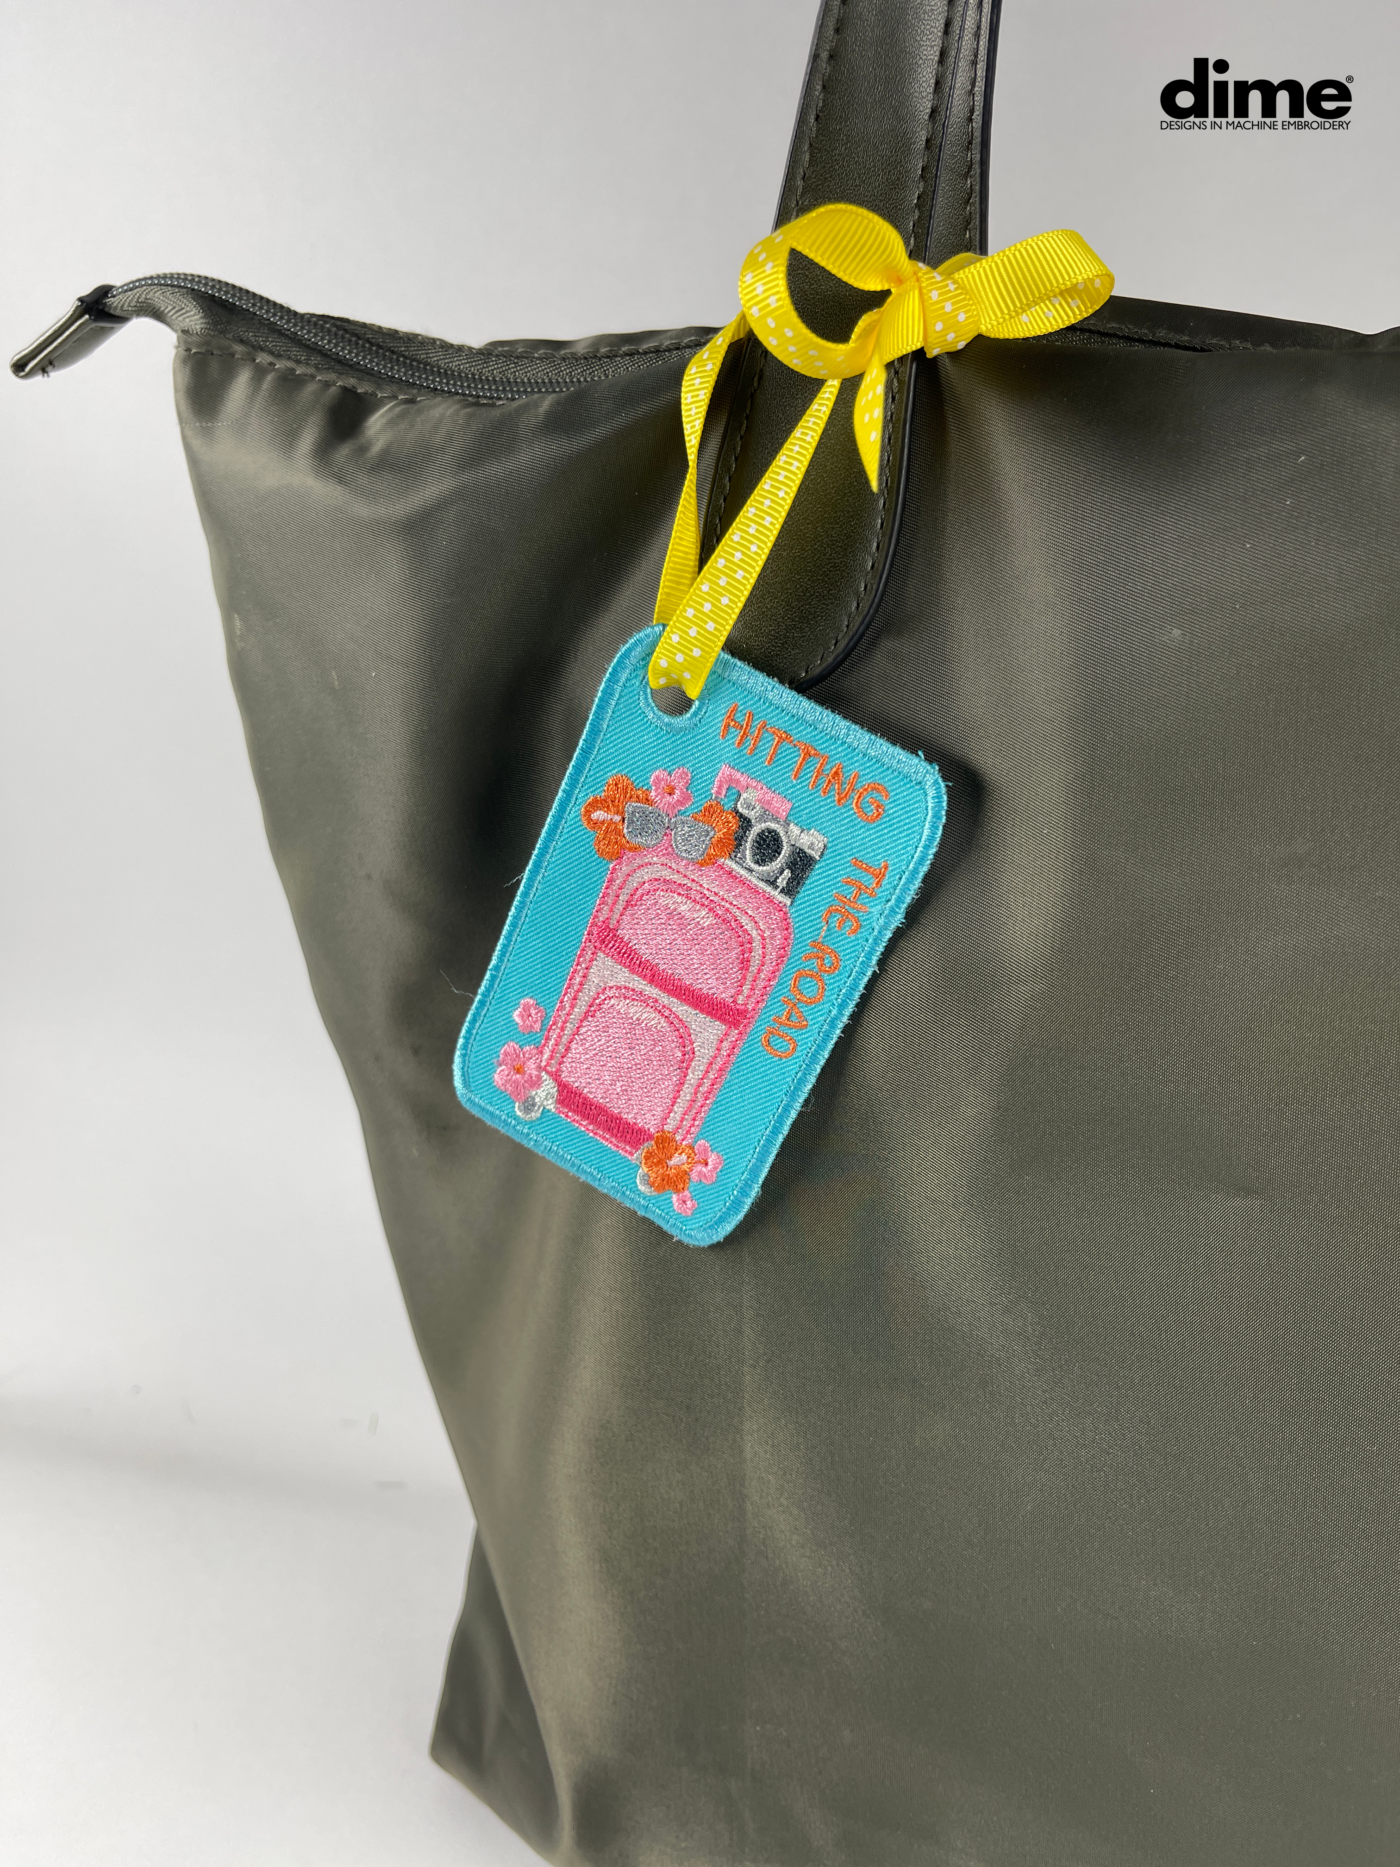 Tripping Luggage Tag n blue and pink attached to a grey bag with yellow ribbon